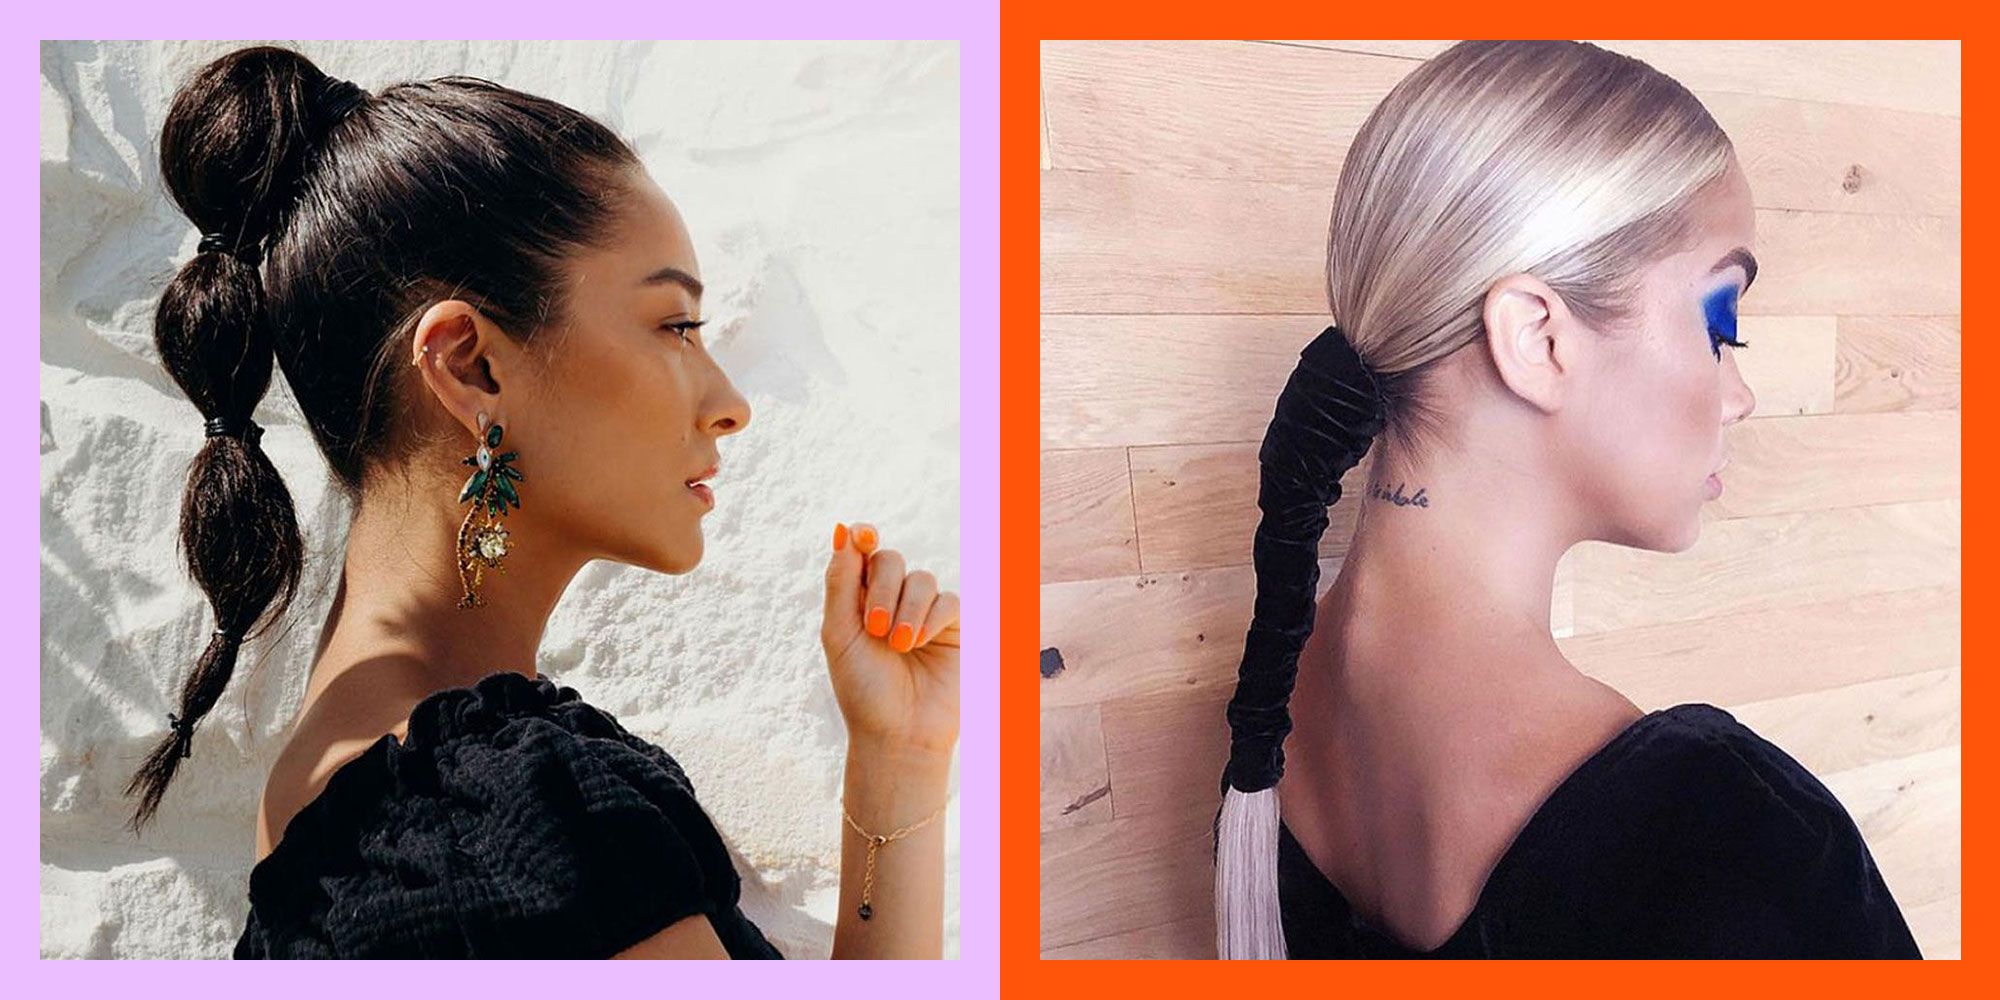 34 Ponytail Braids for Every Occasion